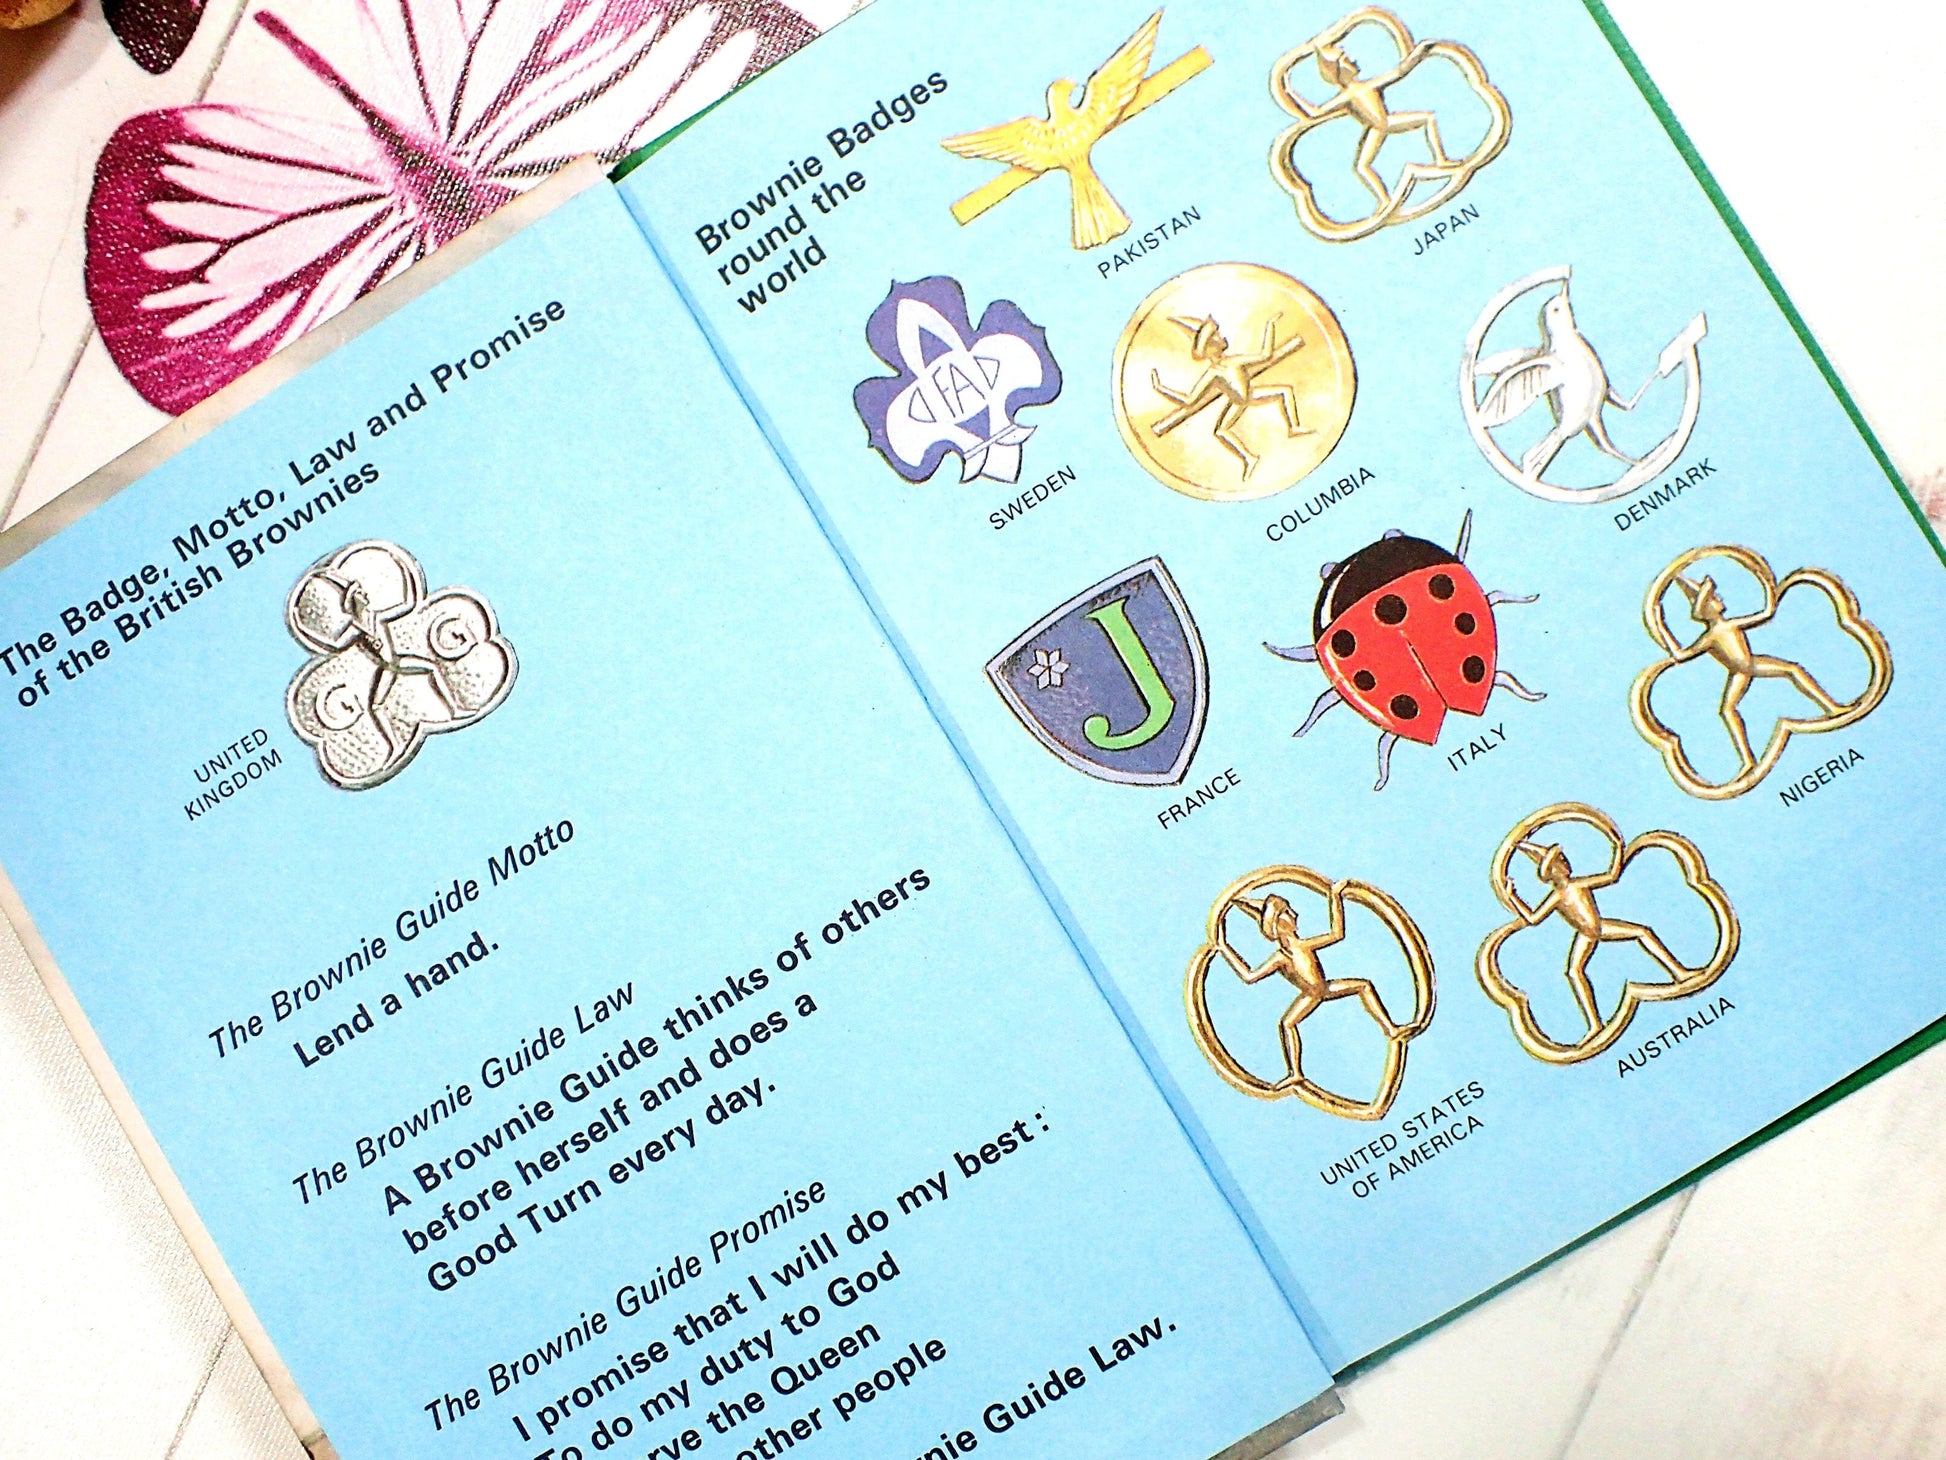 The badges, motto, law and promise of the British Brownies